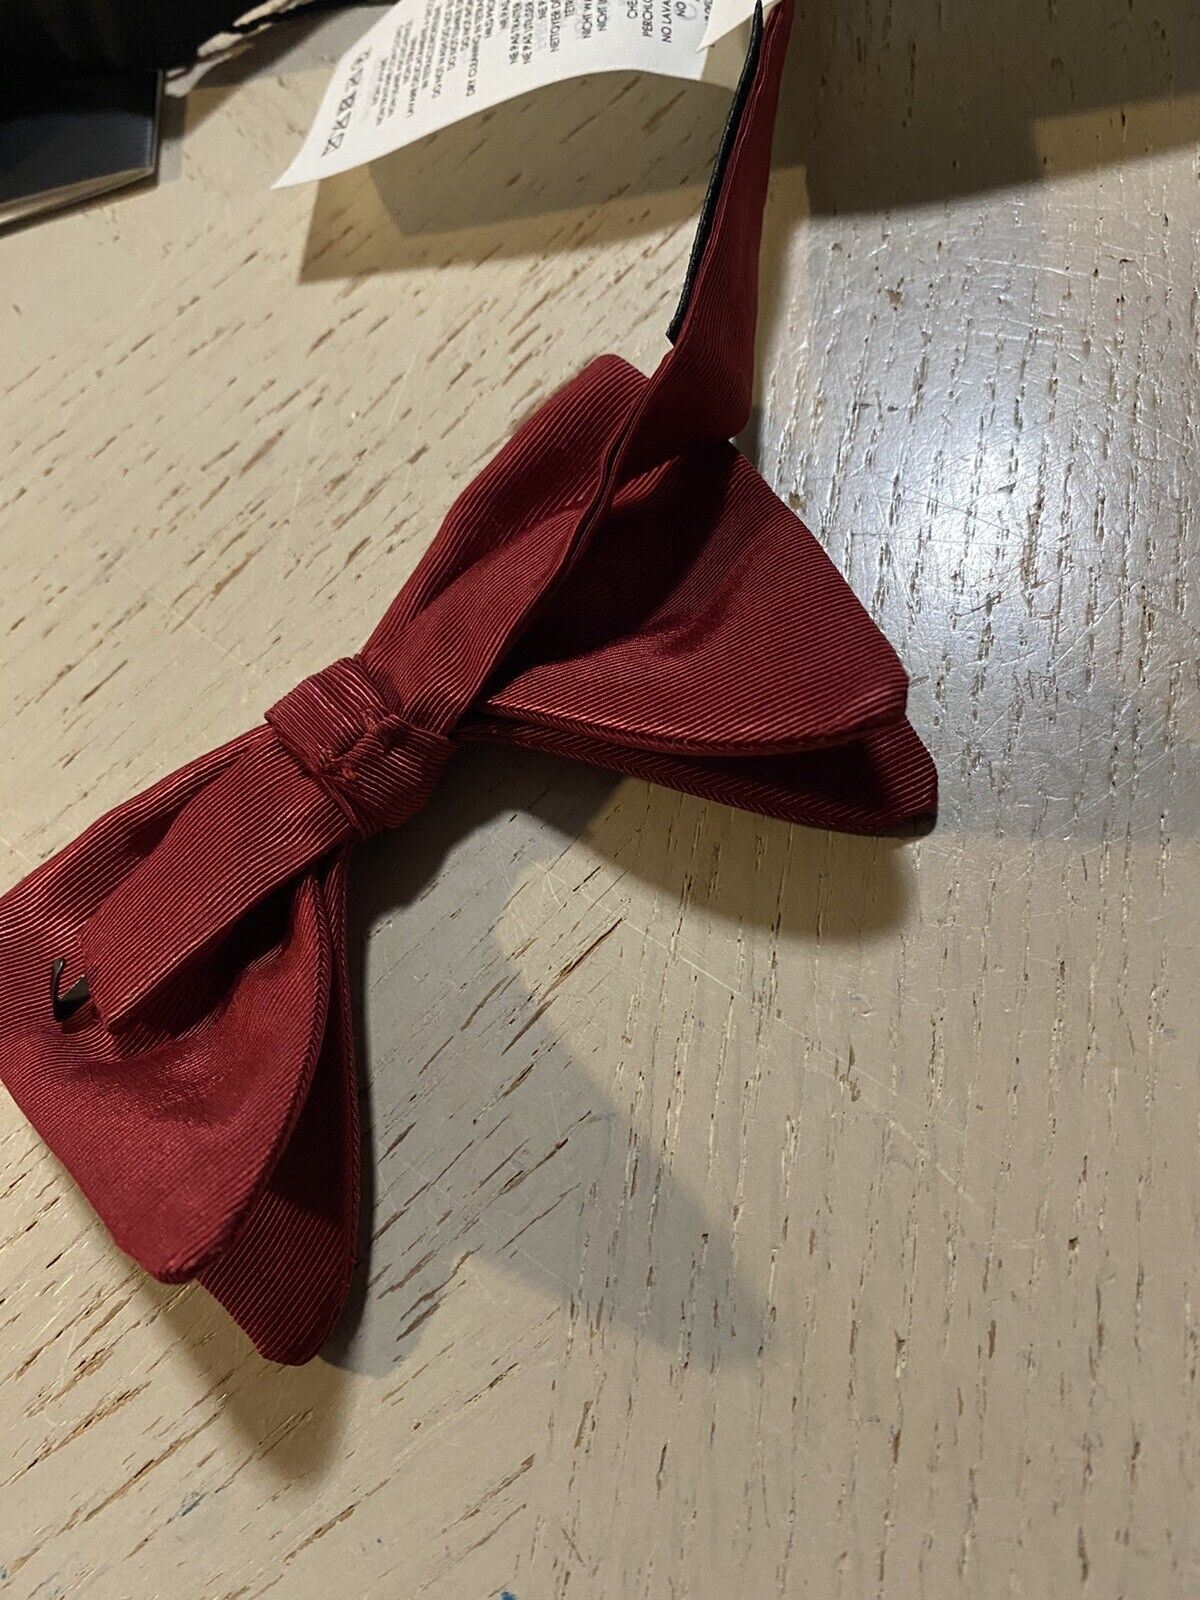 New  Gucci  Bow Tie Red Made in Italy